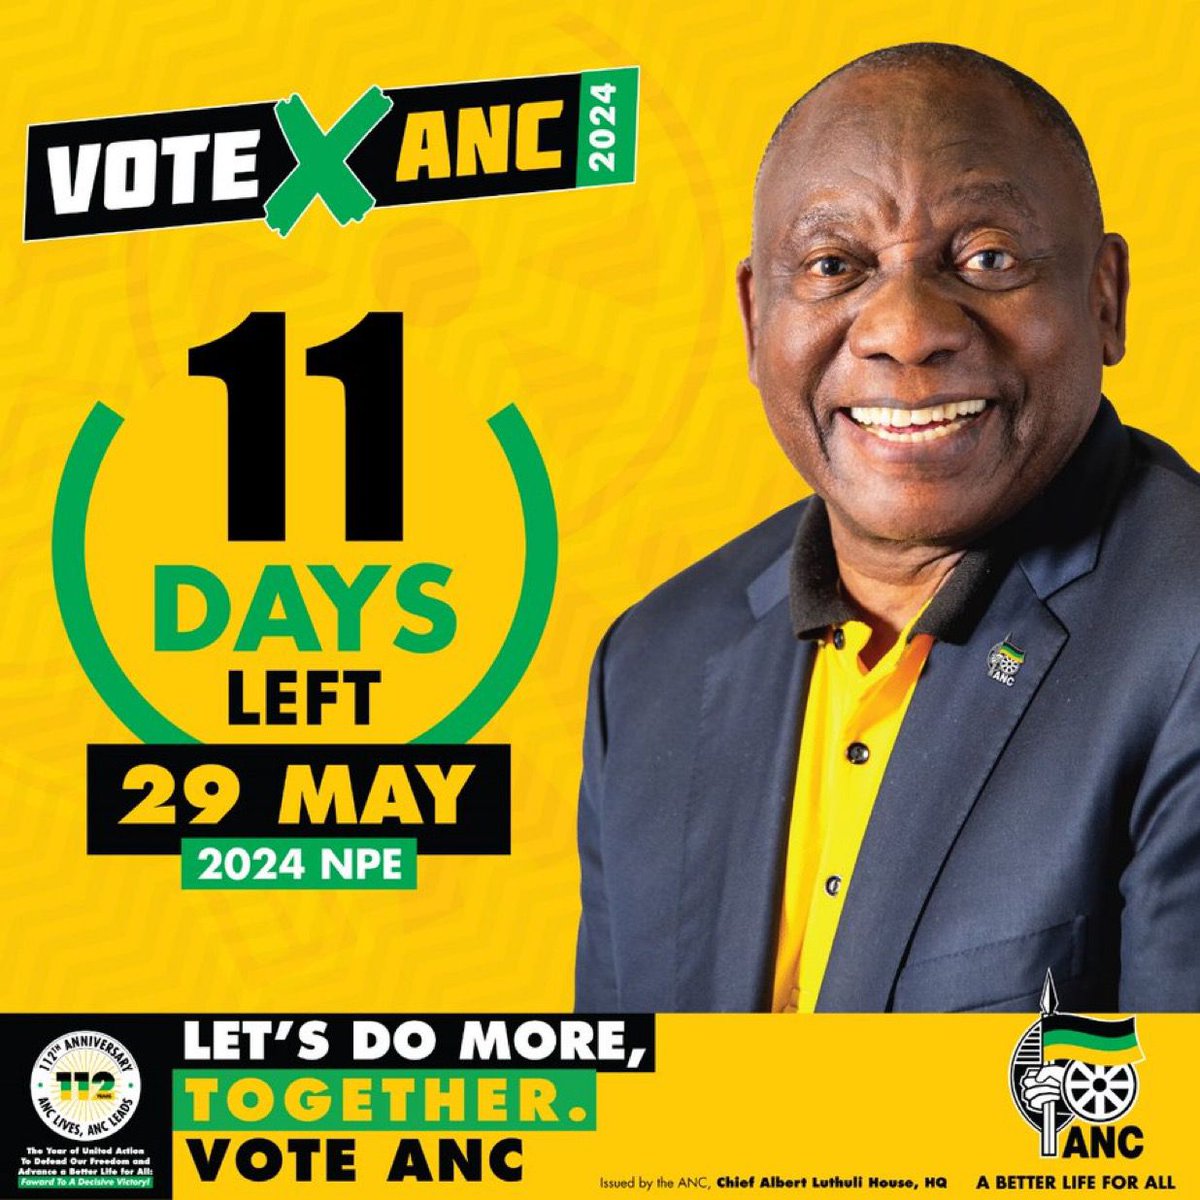 11 days to go until the 29th of May. Siyaquba! 

1st Ballot: #VoteANC ❎
2nd Ballot: #VoteANC ❎
3rd Ballot: #VoteANC ❎

#VoteANC2024
#LetsDoMoreTogether ⚫️🟢🟡